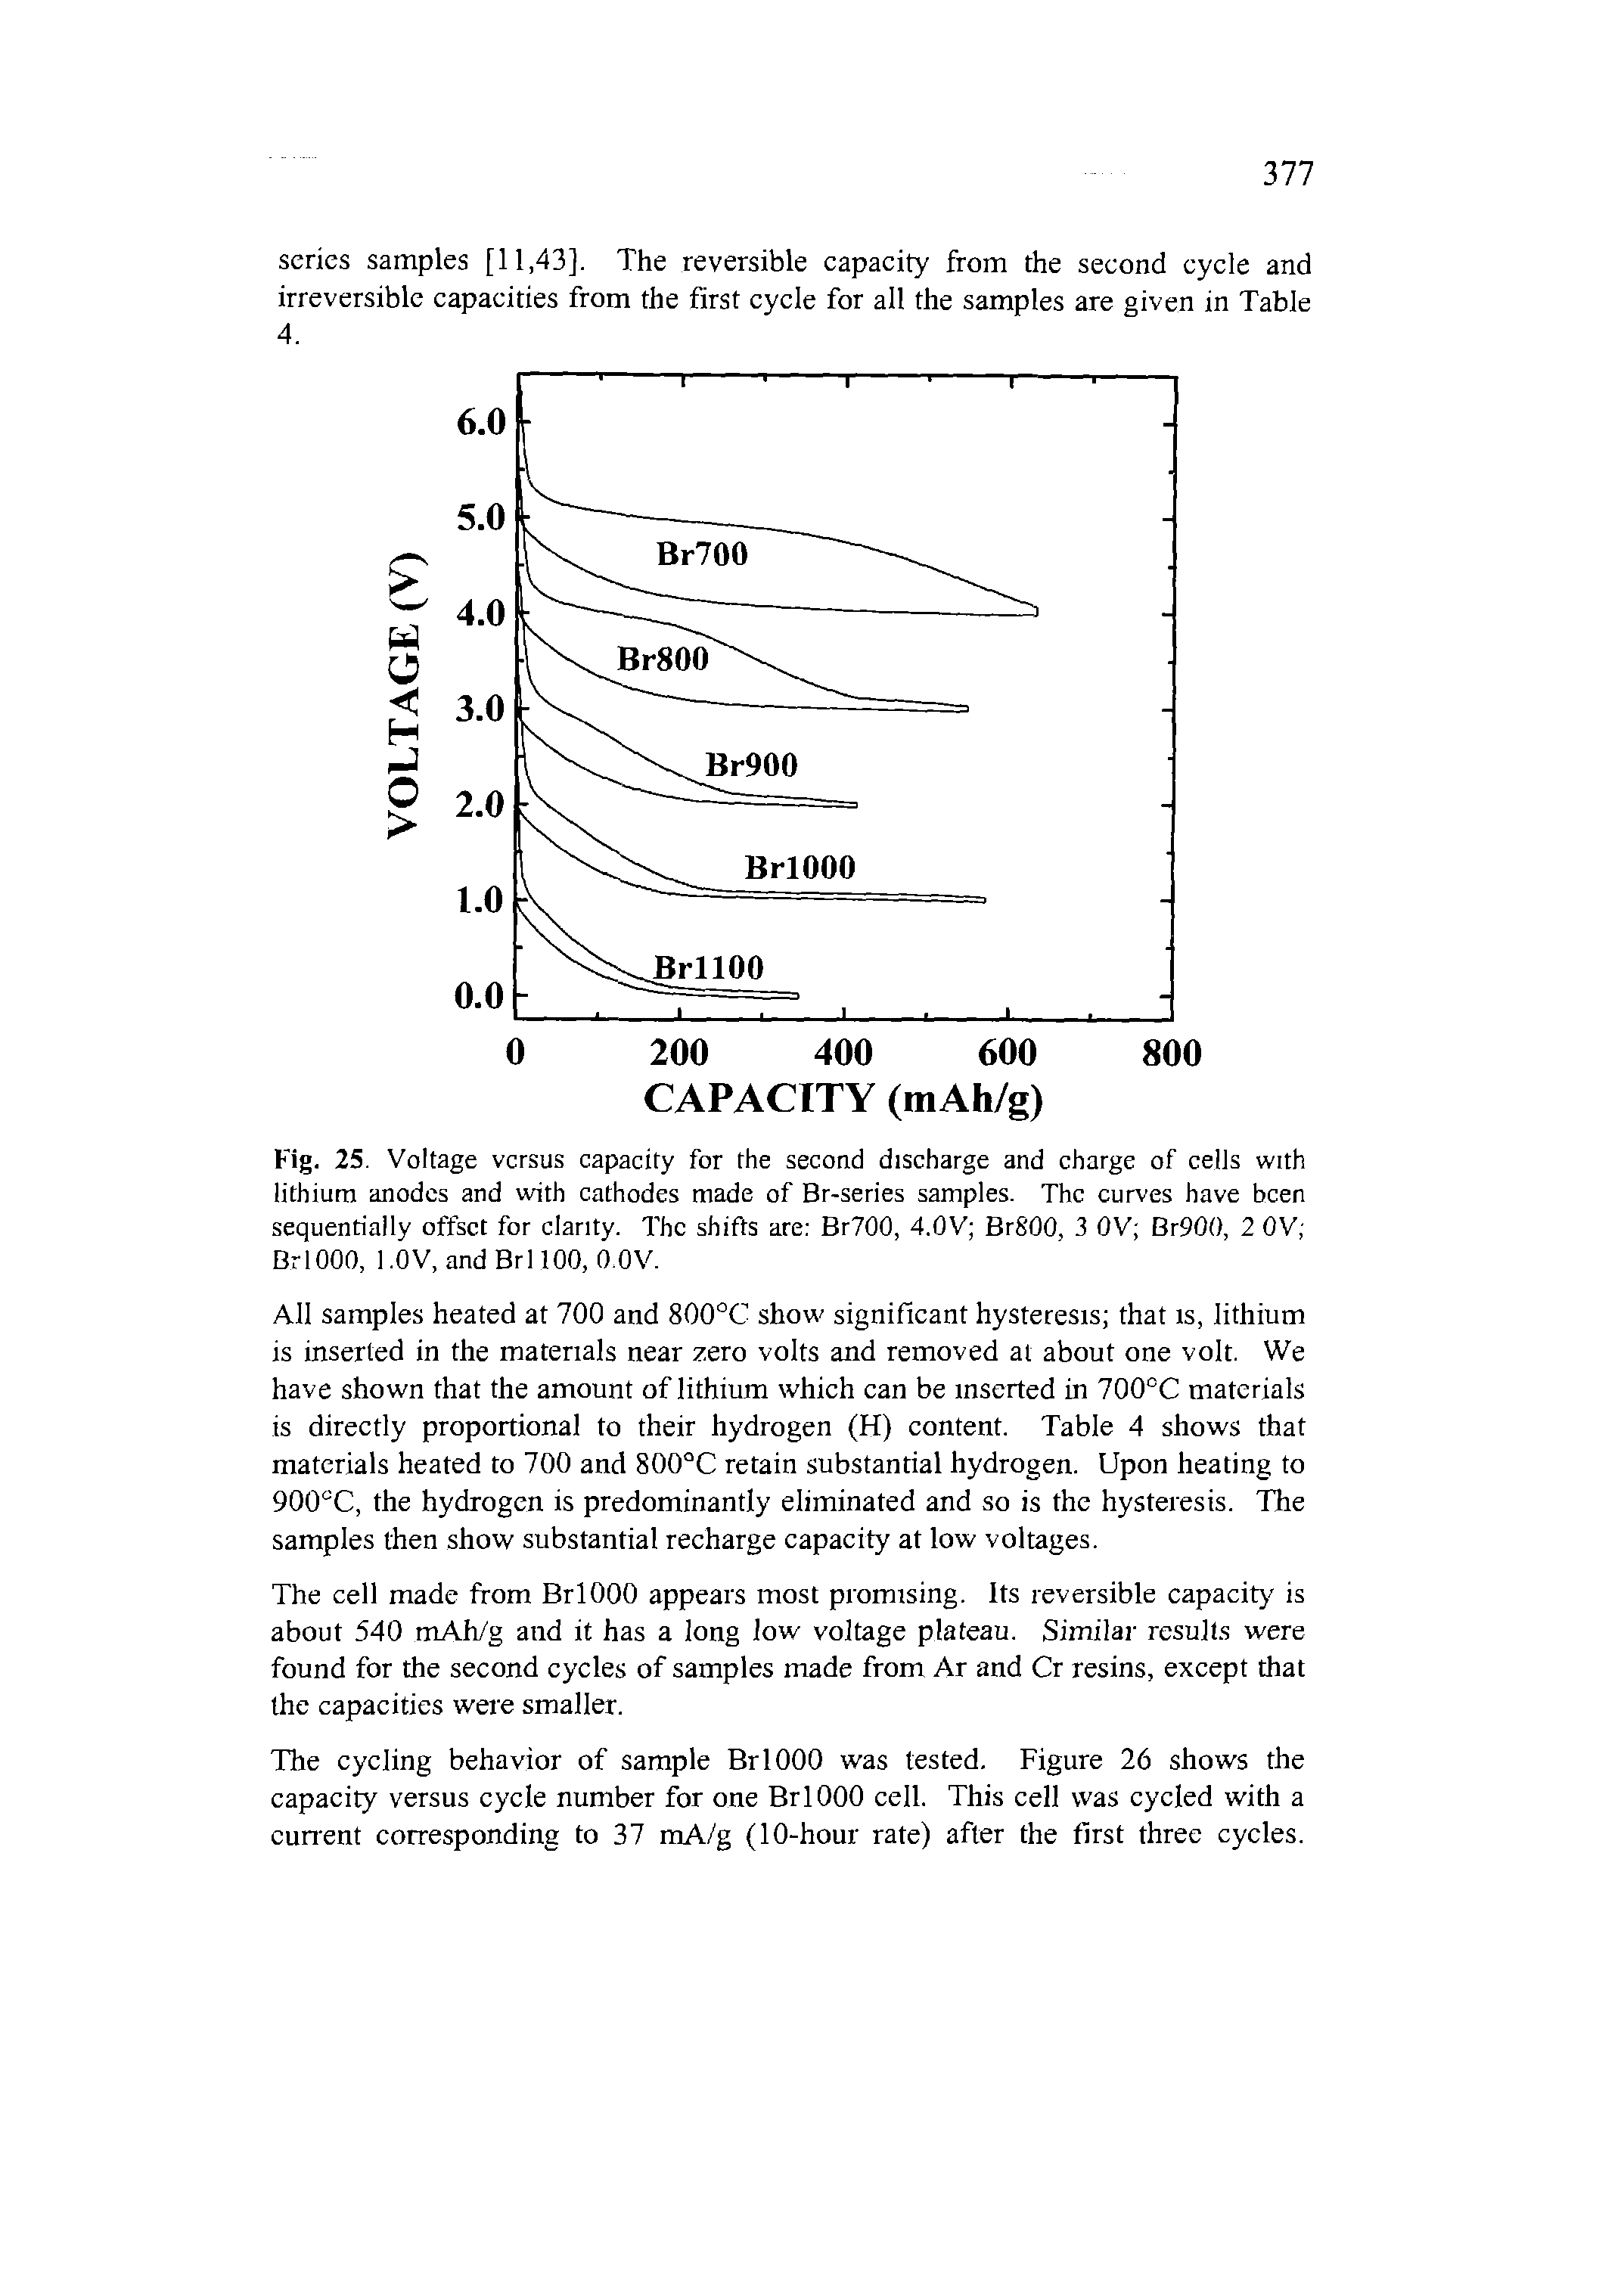 Fig. 25. Voltage versus capacity for the second discharge and charge of cells with lithium anodes and with cathodes made of Br-series samples. The curves have been sequentially offset for clarity. The shifts are Br700, 4.0V BrS OO, 3 OV Br900, 2 OV BrlOOO, l.OV, and BrllOO, 0.0V.